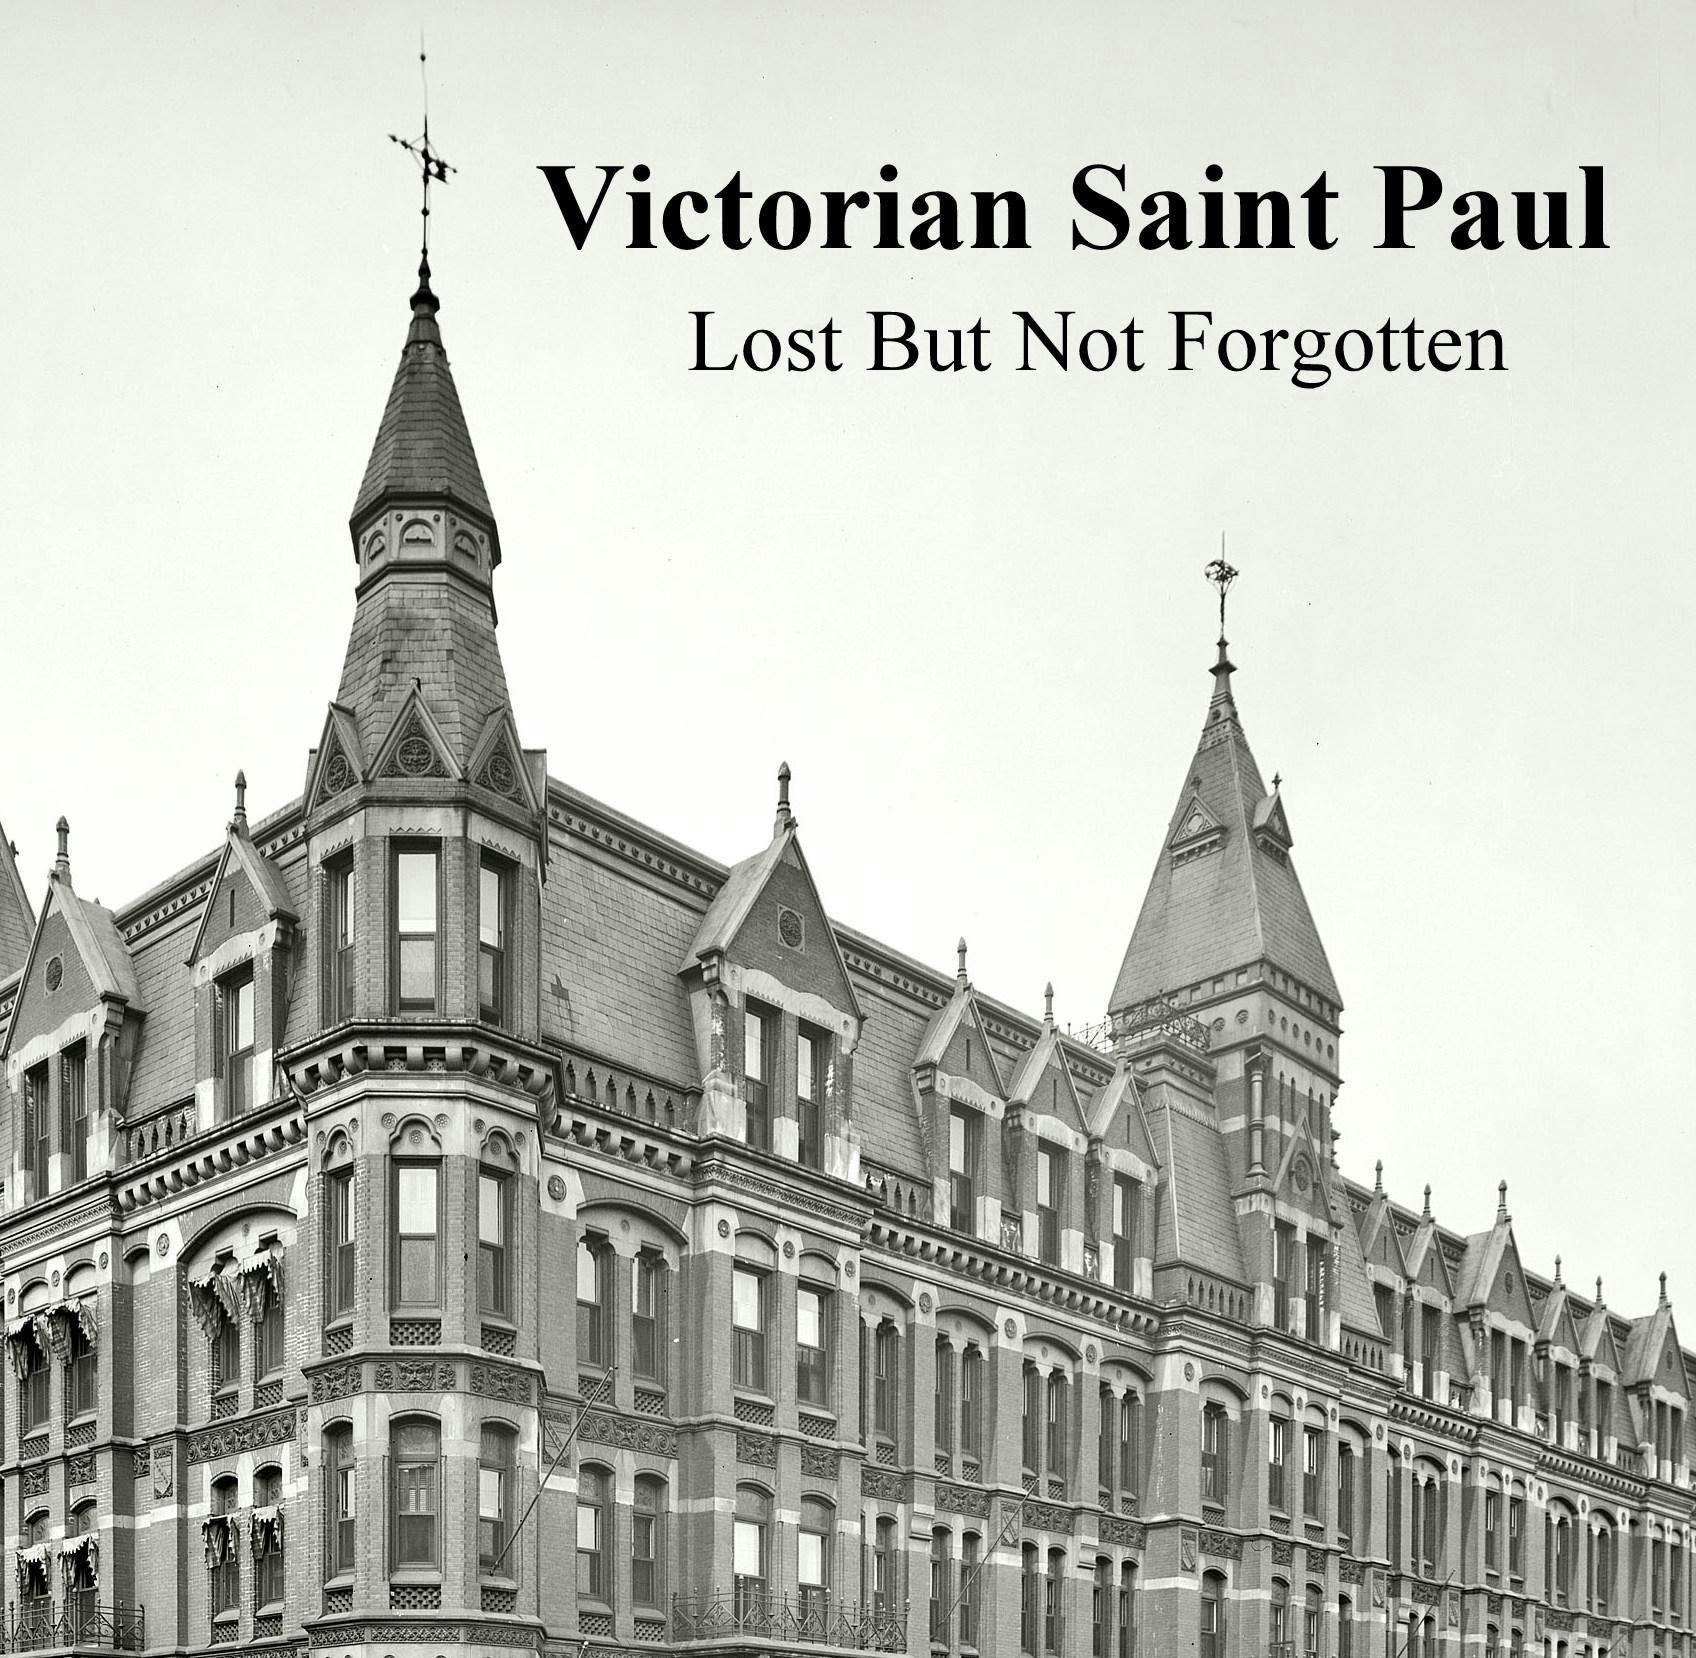 A Pint of History - Victorian Saint Paul - Lost But Not Forgotten